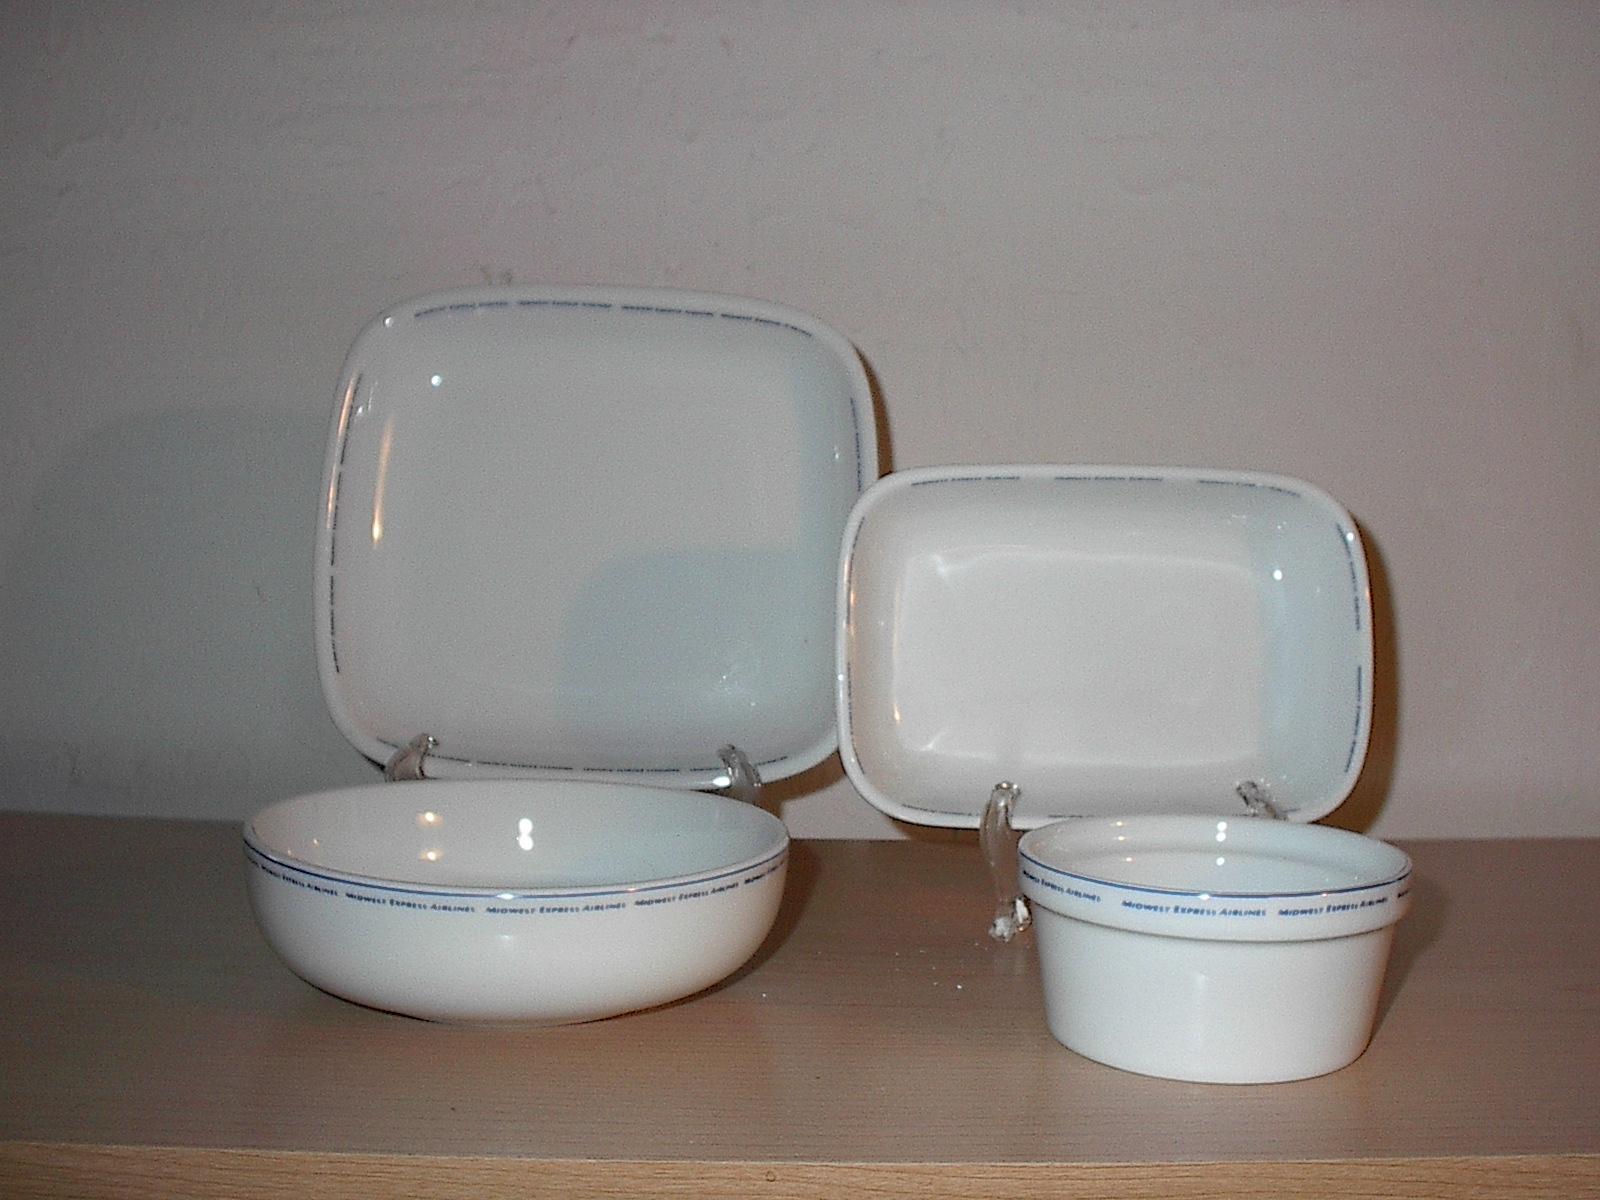 Midwest Express Airlines Dish Set